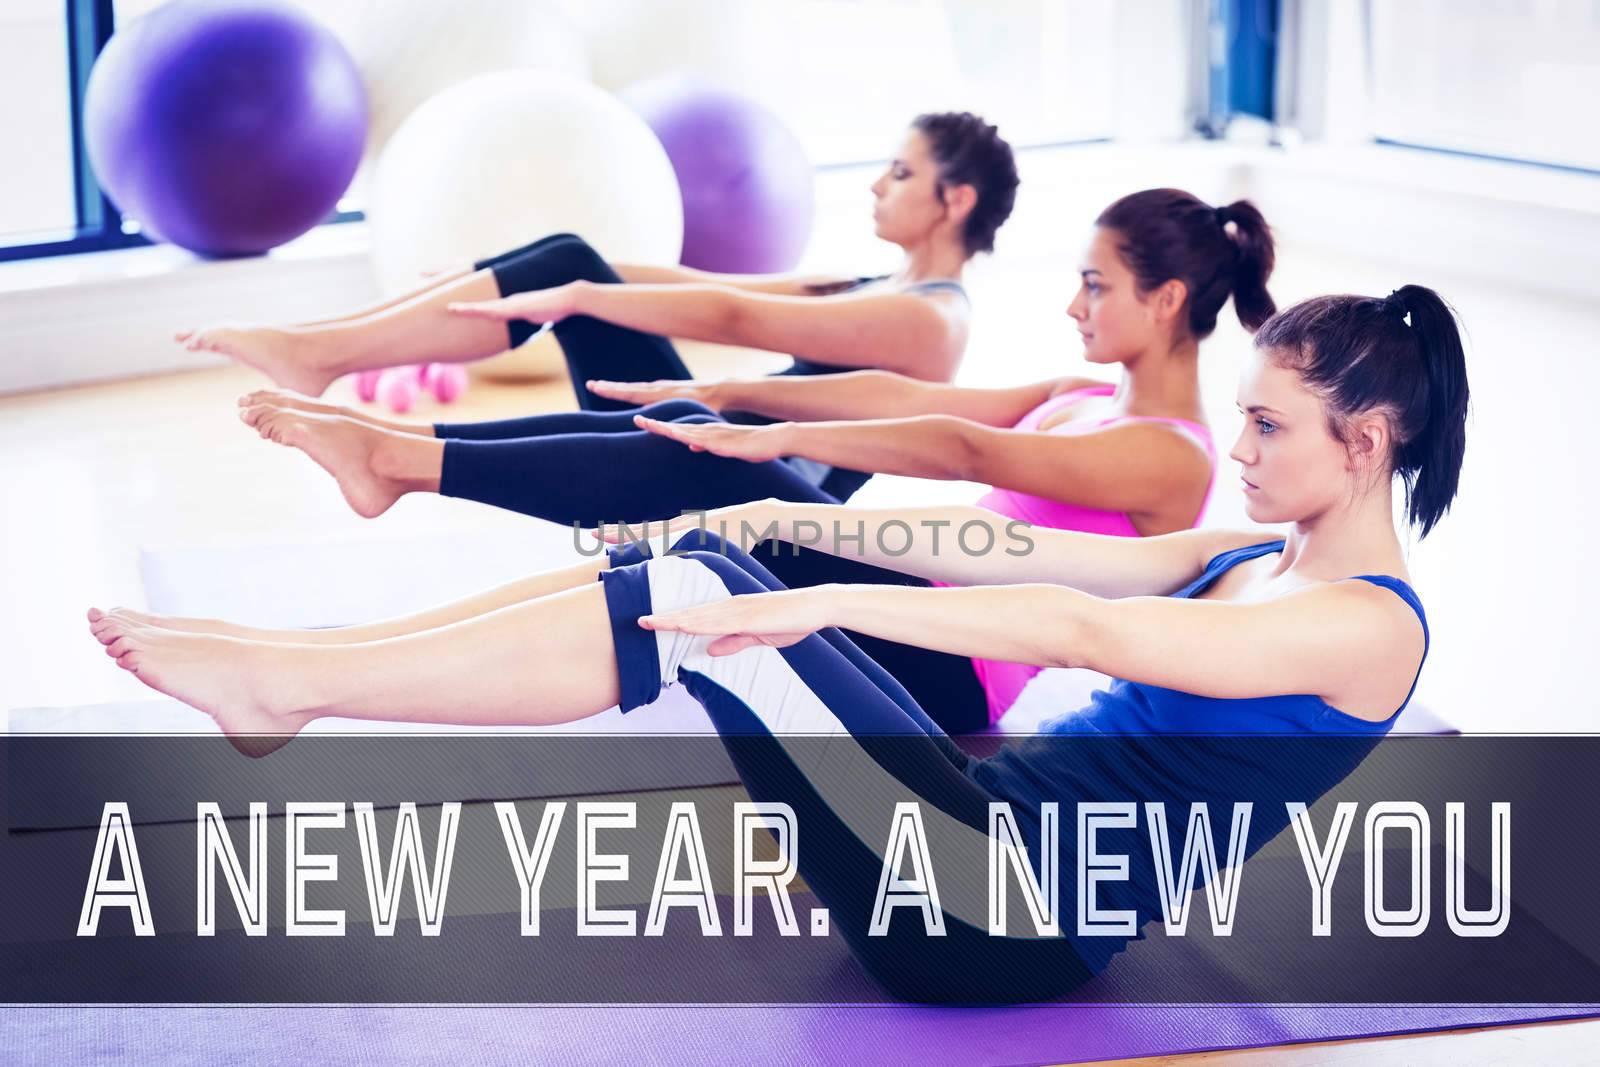 Class stretching on mats at yoga class in fitness studio against motivational new years message